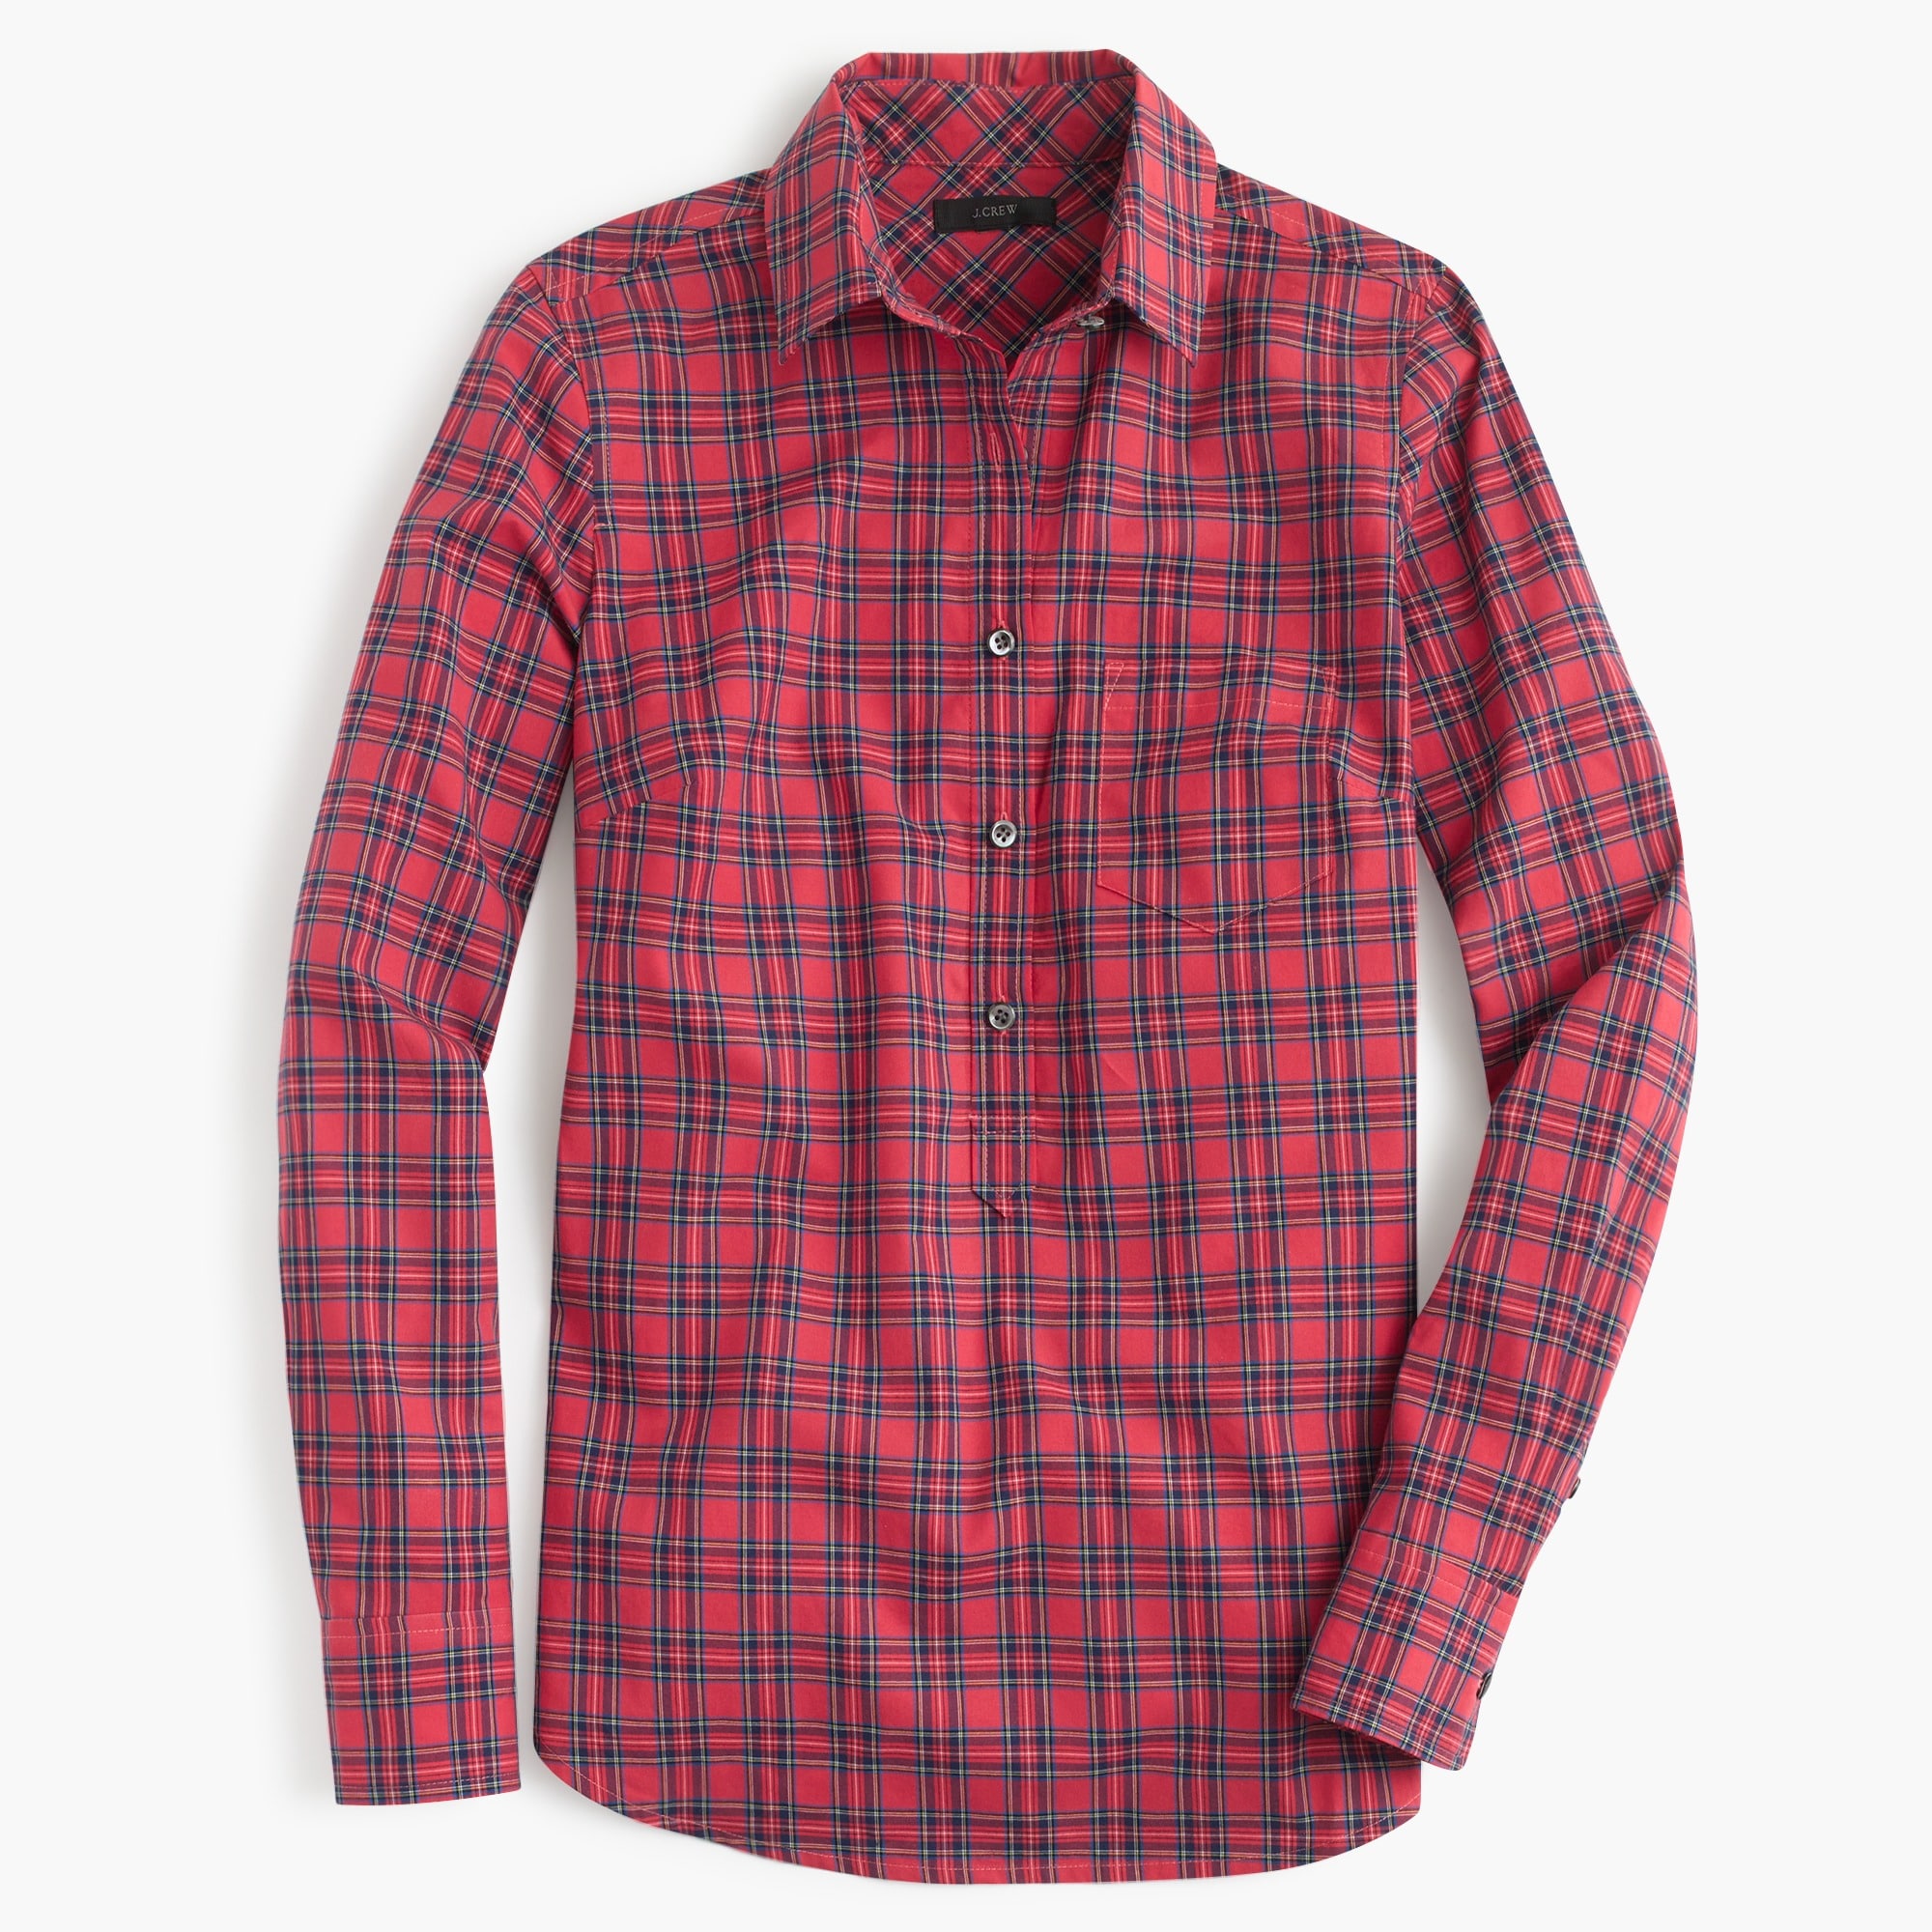 Details about   J Crew red tartan popover plaid top 4